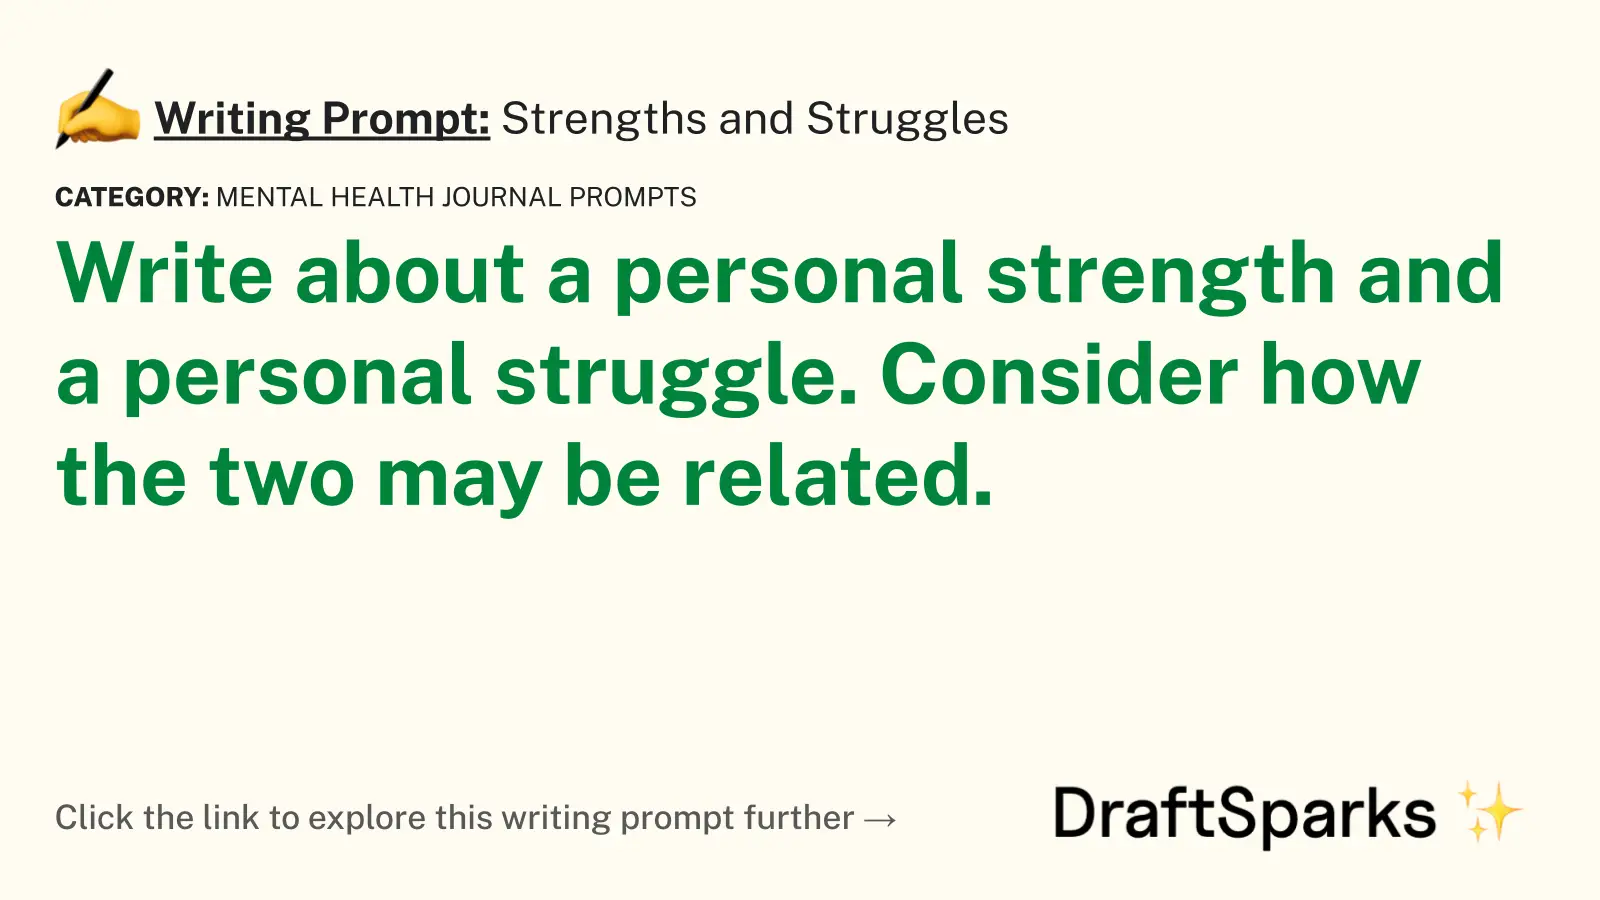 Strengths and Struggles